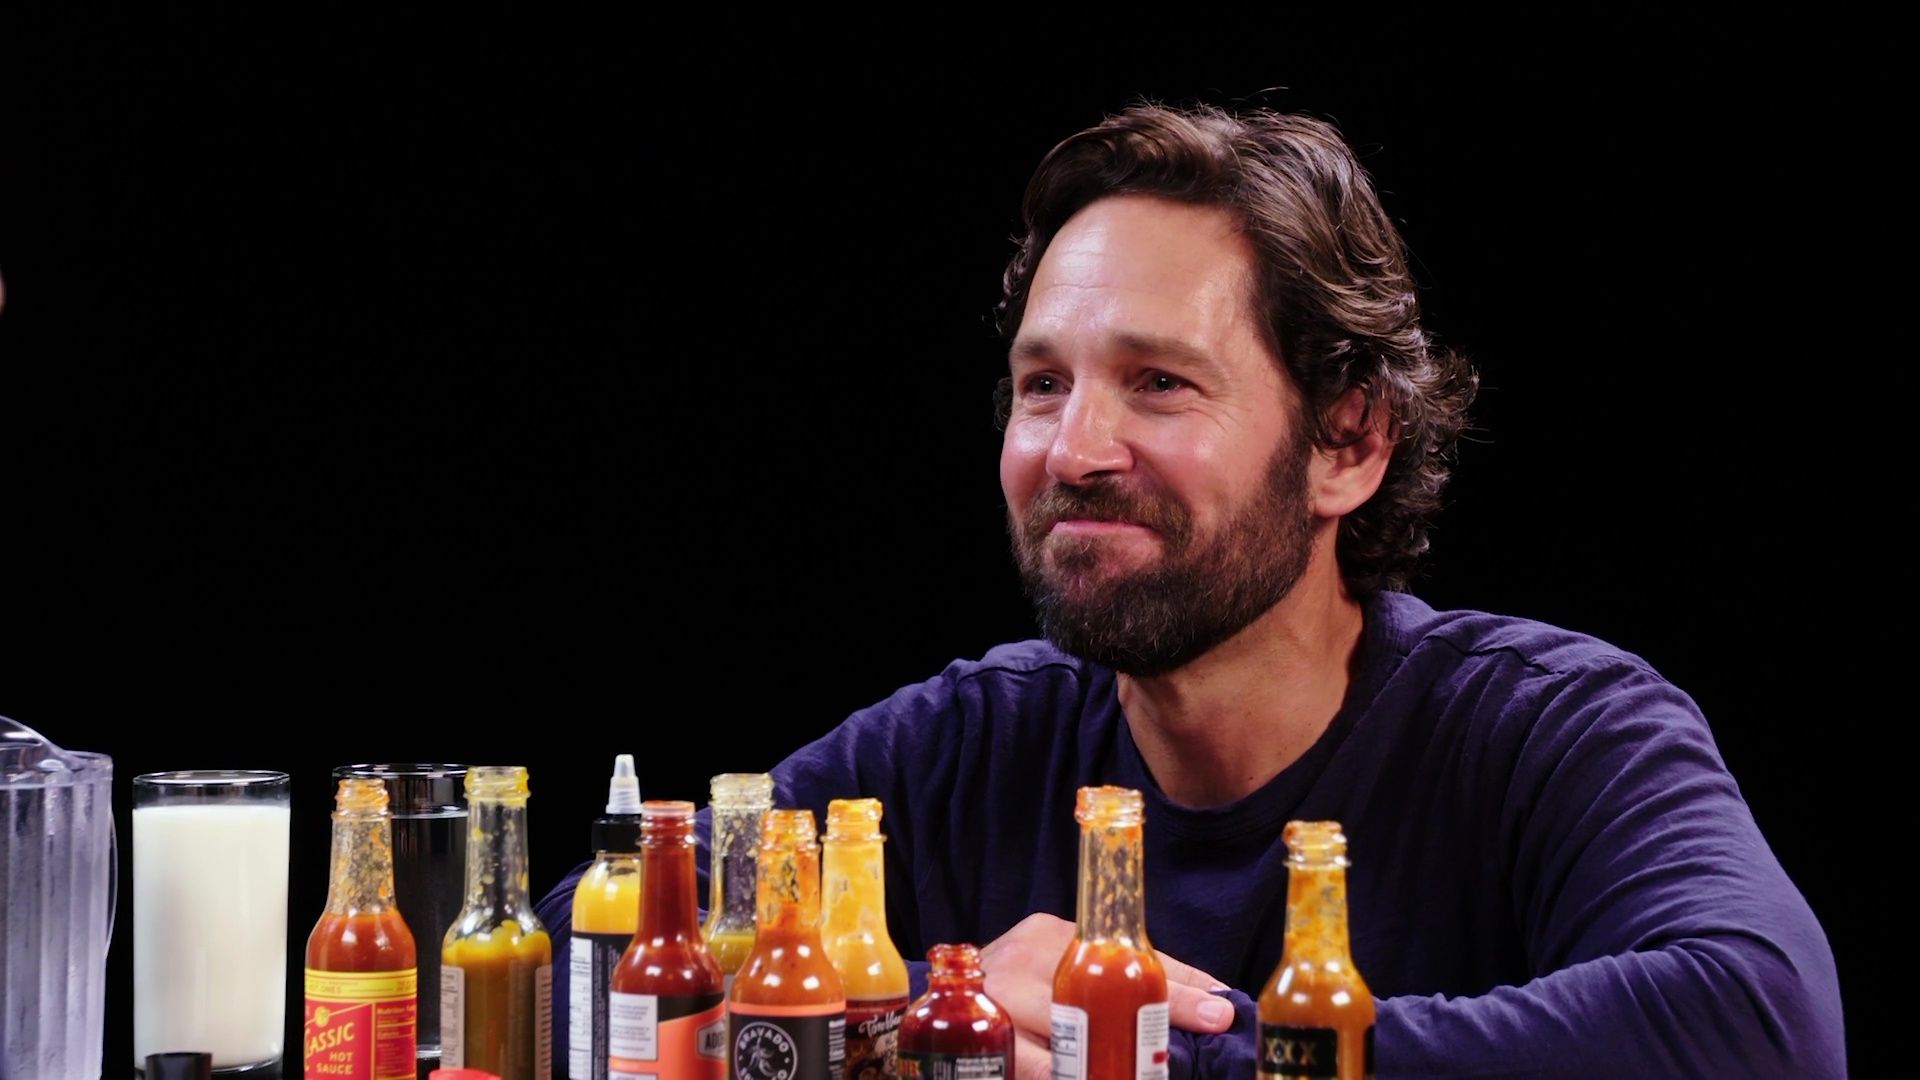 Paul Rudd Does a Historic Dab While Eating Spicy Wings